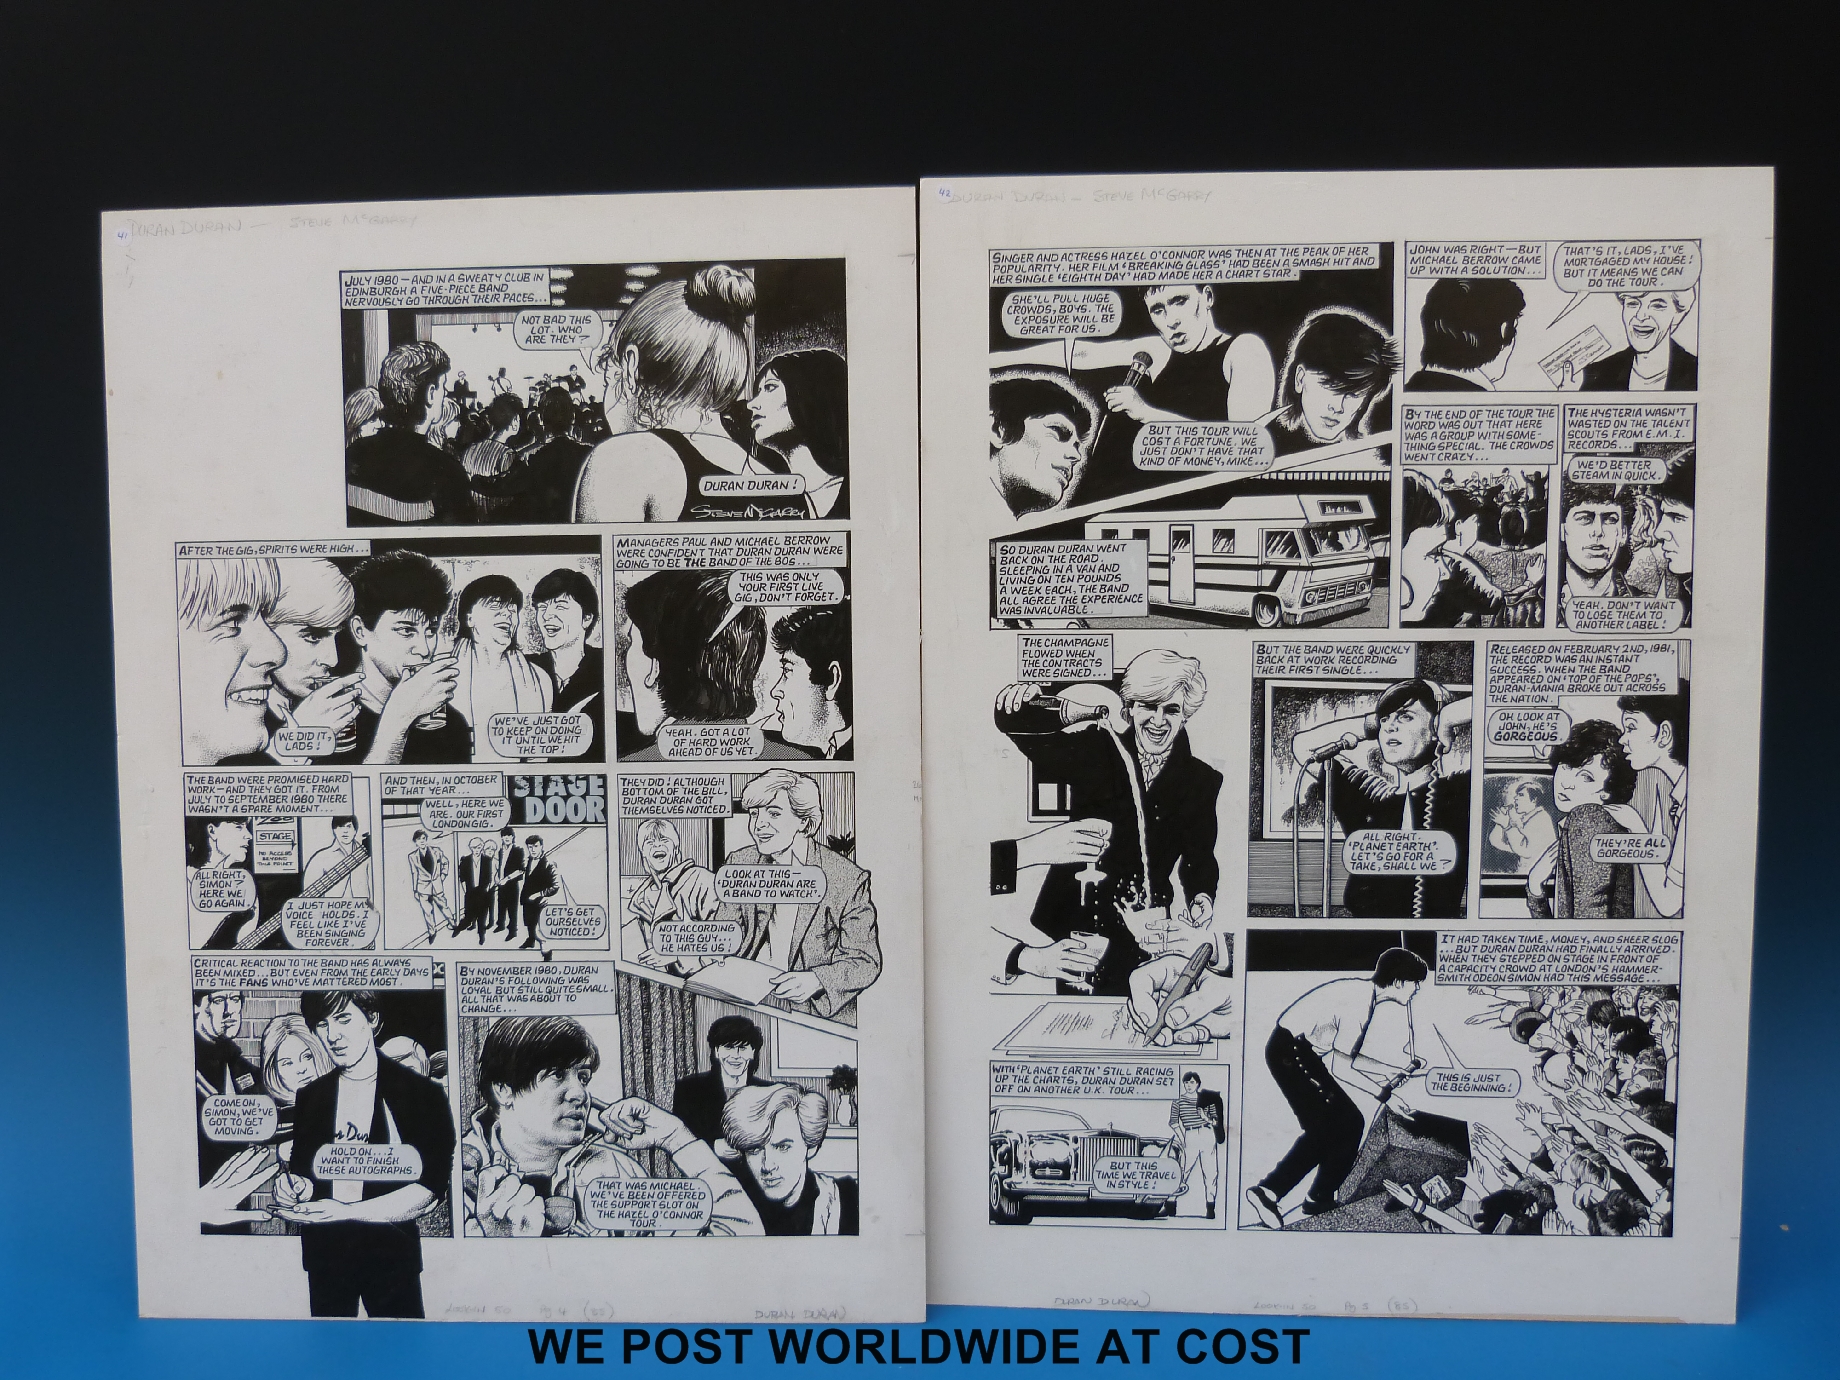 The "Duran Duran" strip from Look-In Issue 50, by Steve McGarry